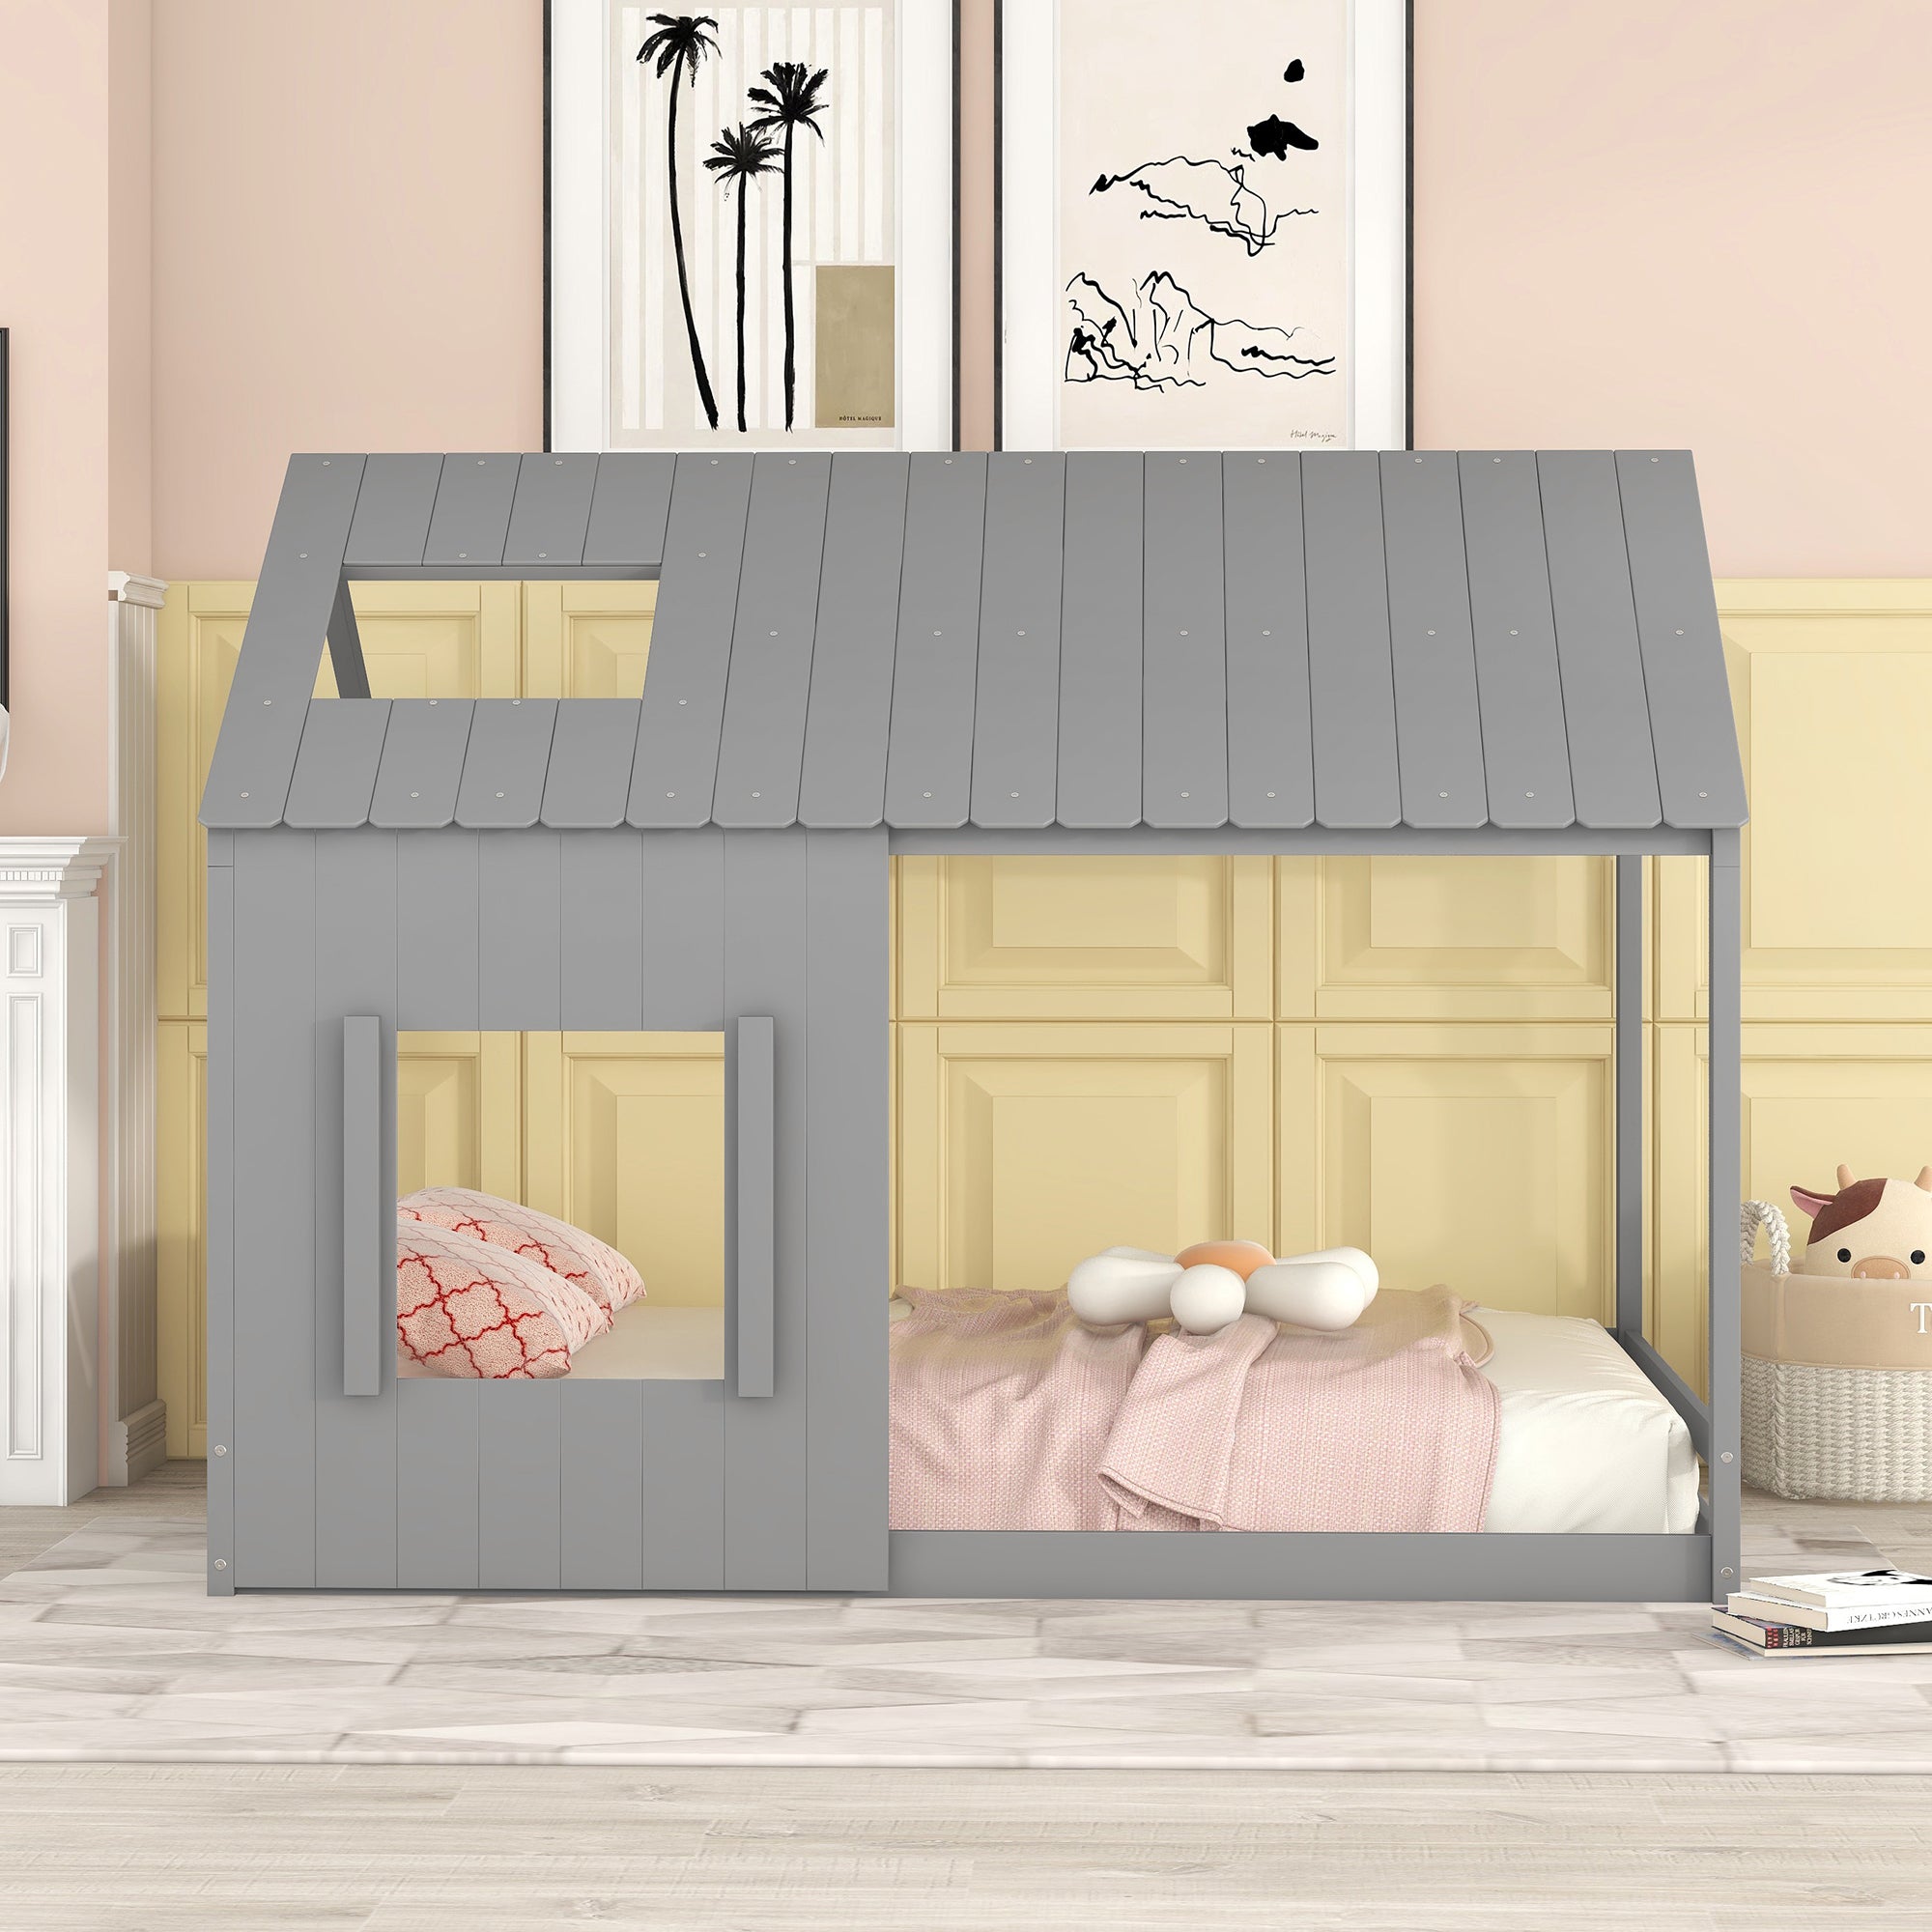 Full Size House Bed with Roof and Window Gray gray-mdf